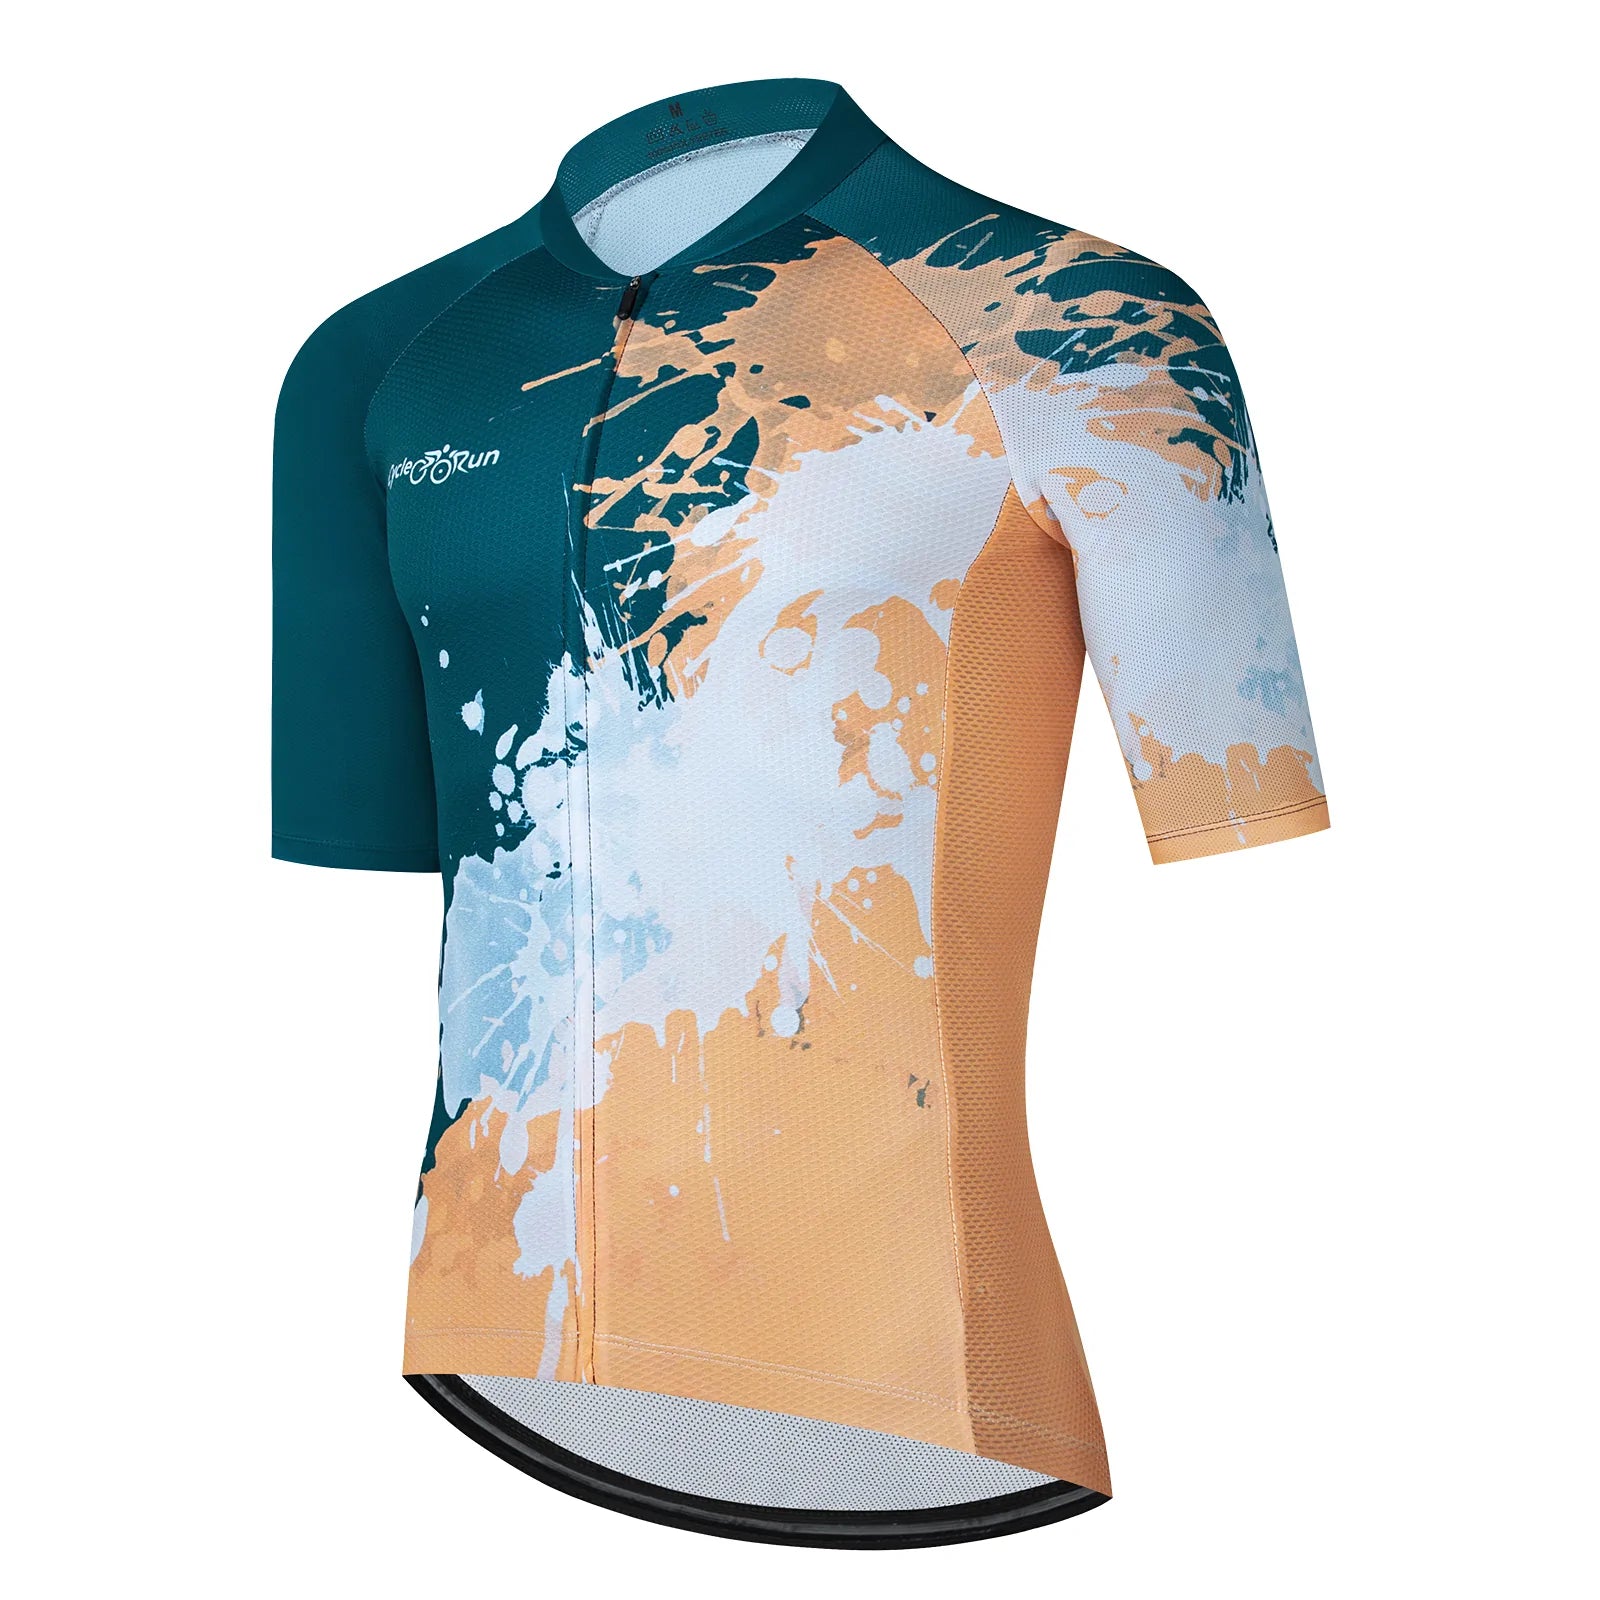 Body color paint splash cycling jersey for women